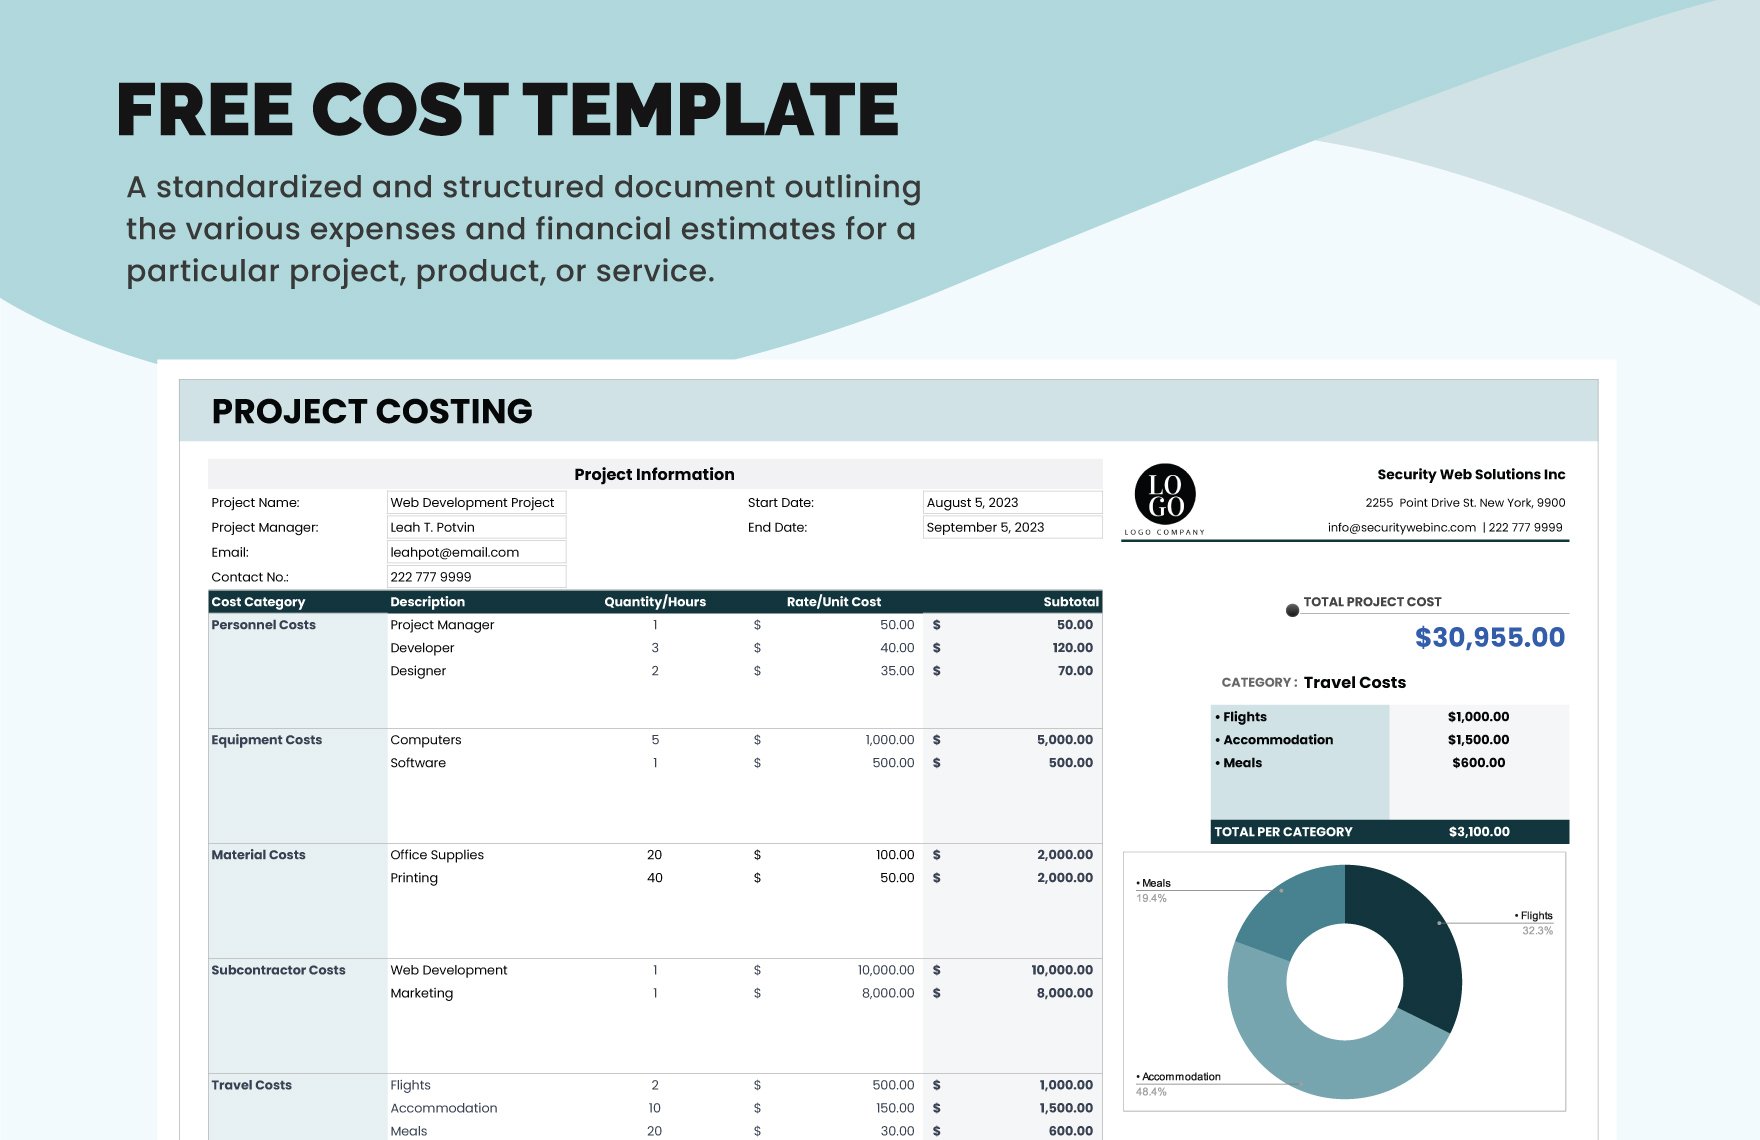 Free Cost Template